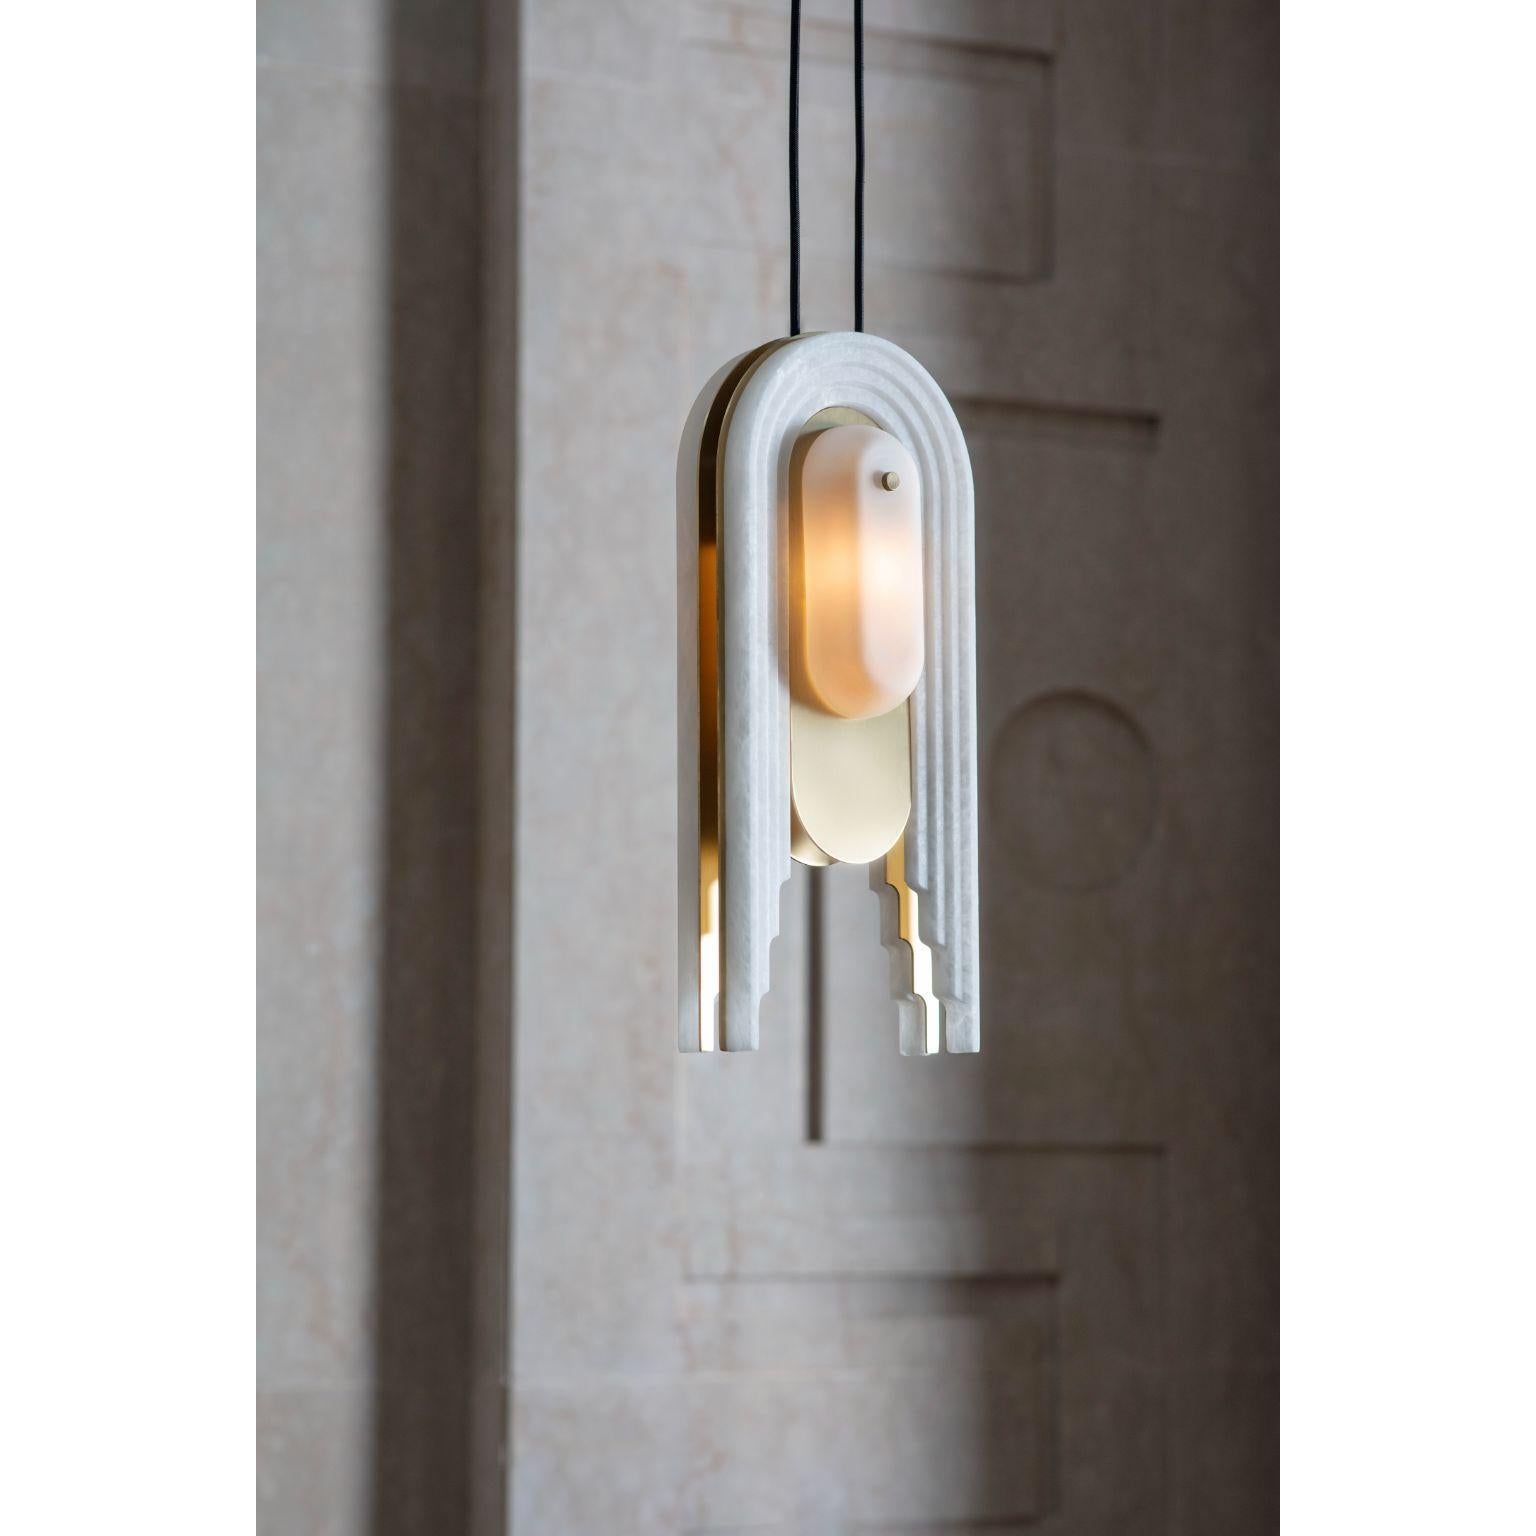 Vima small pendant light by Bert Frank
Dimensions: D17.6 x W9.3 x H39.3 cm
Materials: Brass, Alabaster, Glass
WEIGHT:5.5kg net, 6.5kg gross
FINISHES: Brushed brass lacquered as standard, Alabaster facade
IP RATING, IP20 rated, suitable for